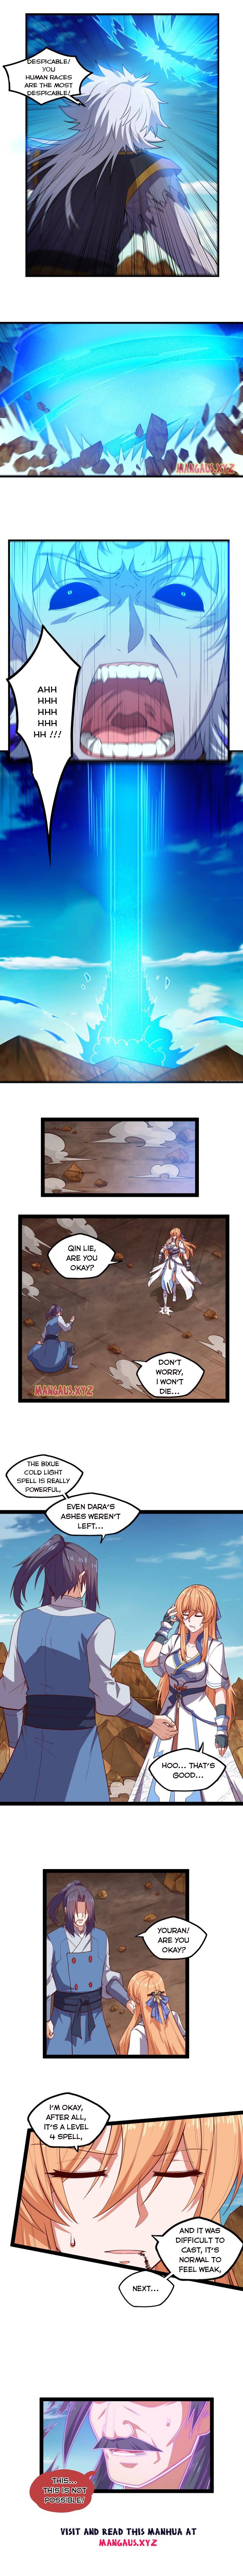 Trample On The River Of Immortality - Page 3